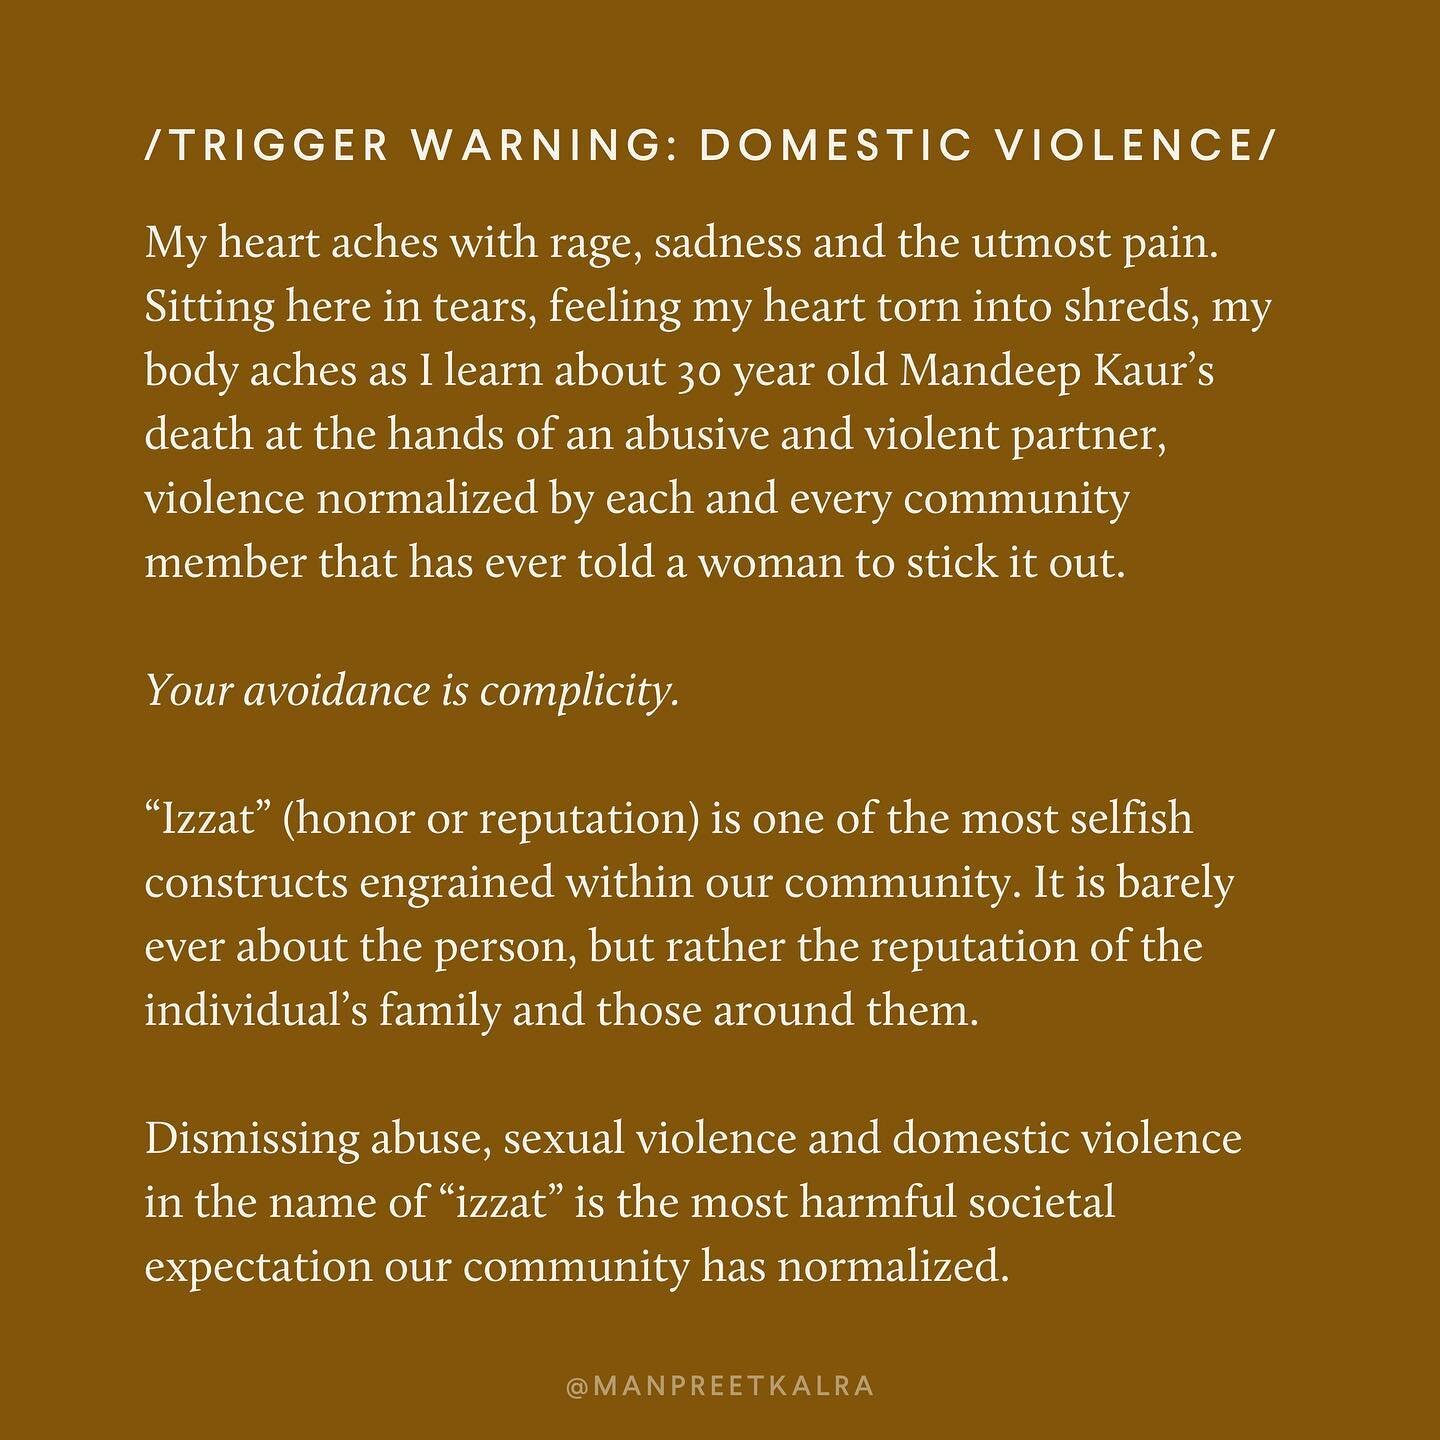 //TRIGGER WARNING: ABUSE, DOMESTIC VIOLENCE + SUICIDE//

[A note: Watching the coverage is incredibly traumatizing. I want to take a moment to send love to all my sisters, especially my fellow Kaurs.]

My heart aches with rage, sadness and the utmost